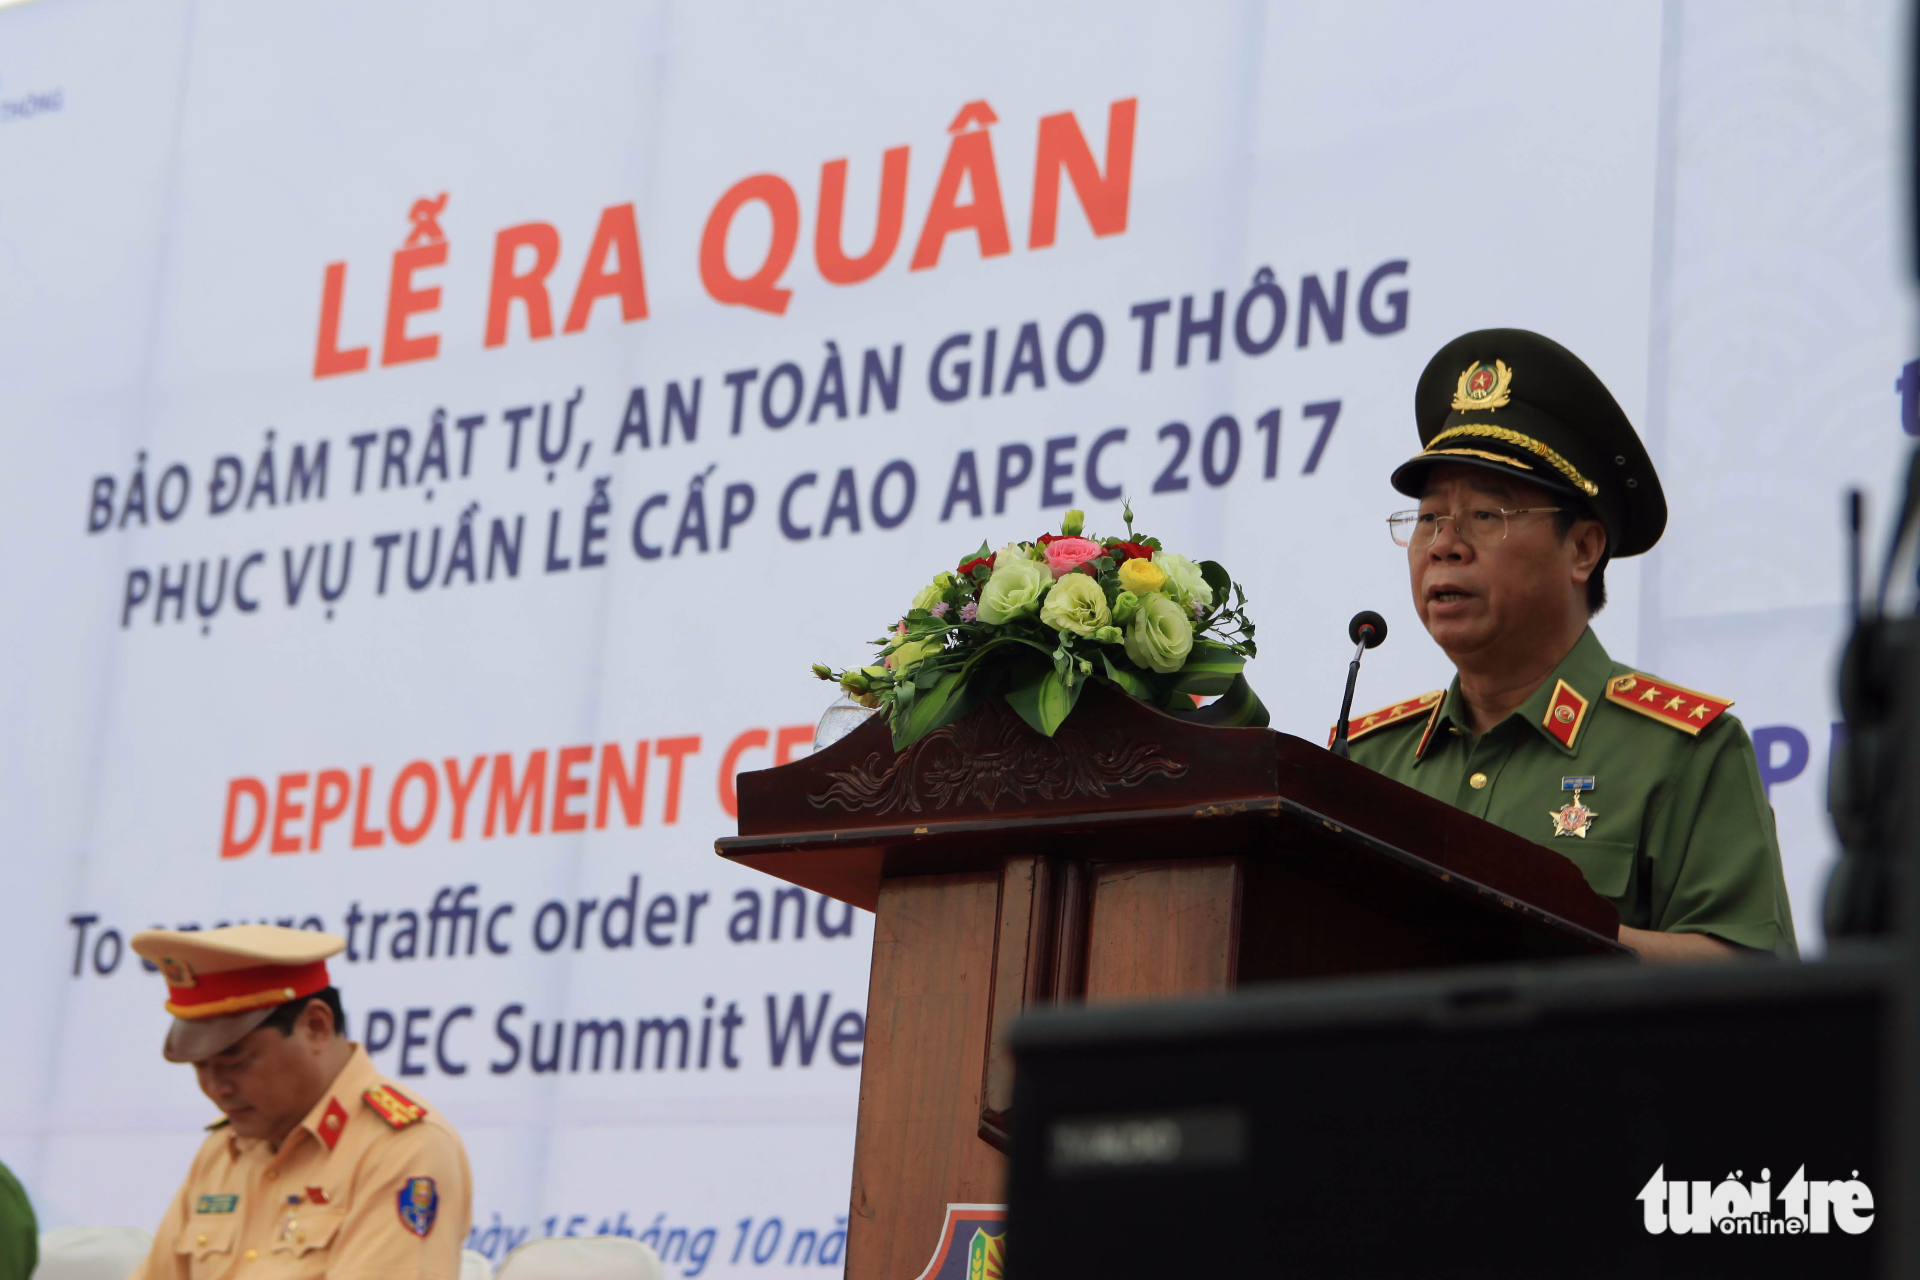 Colonel General Bui Van Nam, Deputy Minister of Public Security and head of the APEC 2017 Security and Order Subcommittee, speaks at the event.